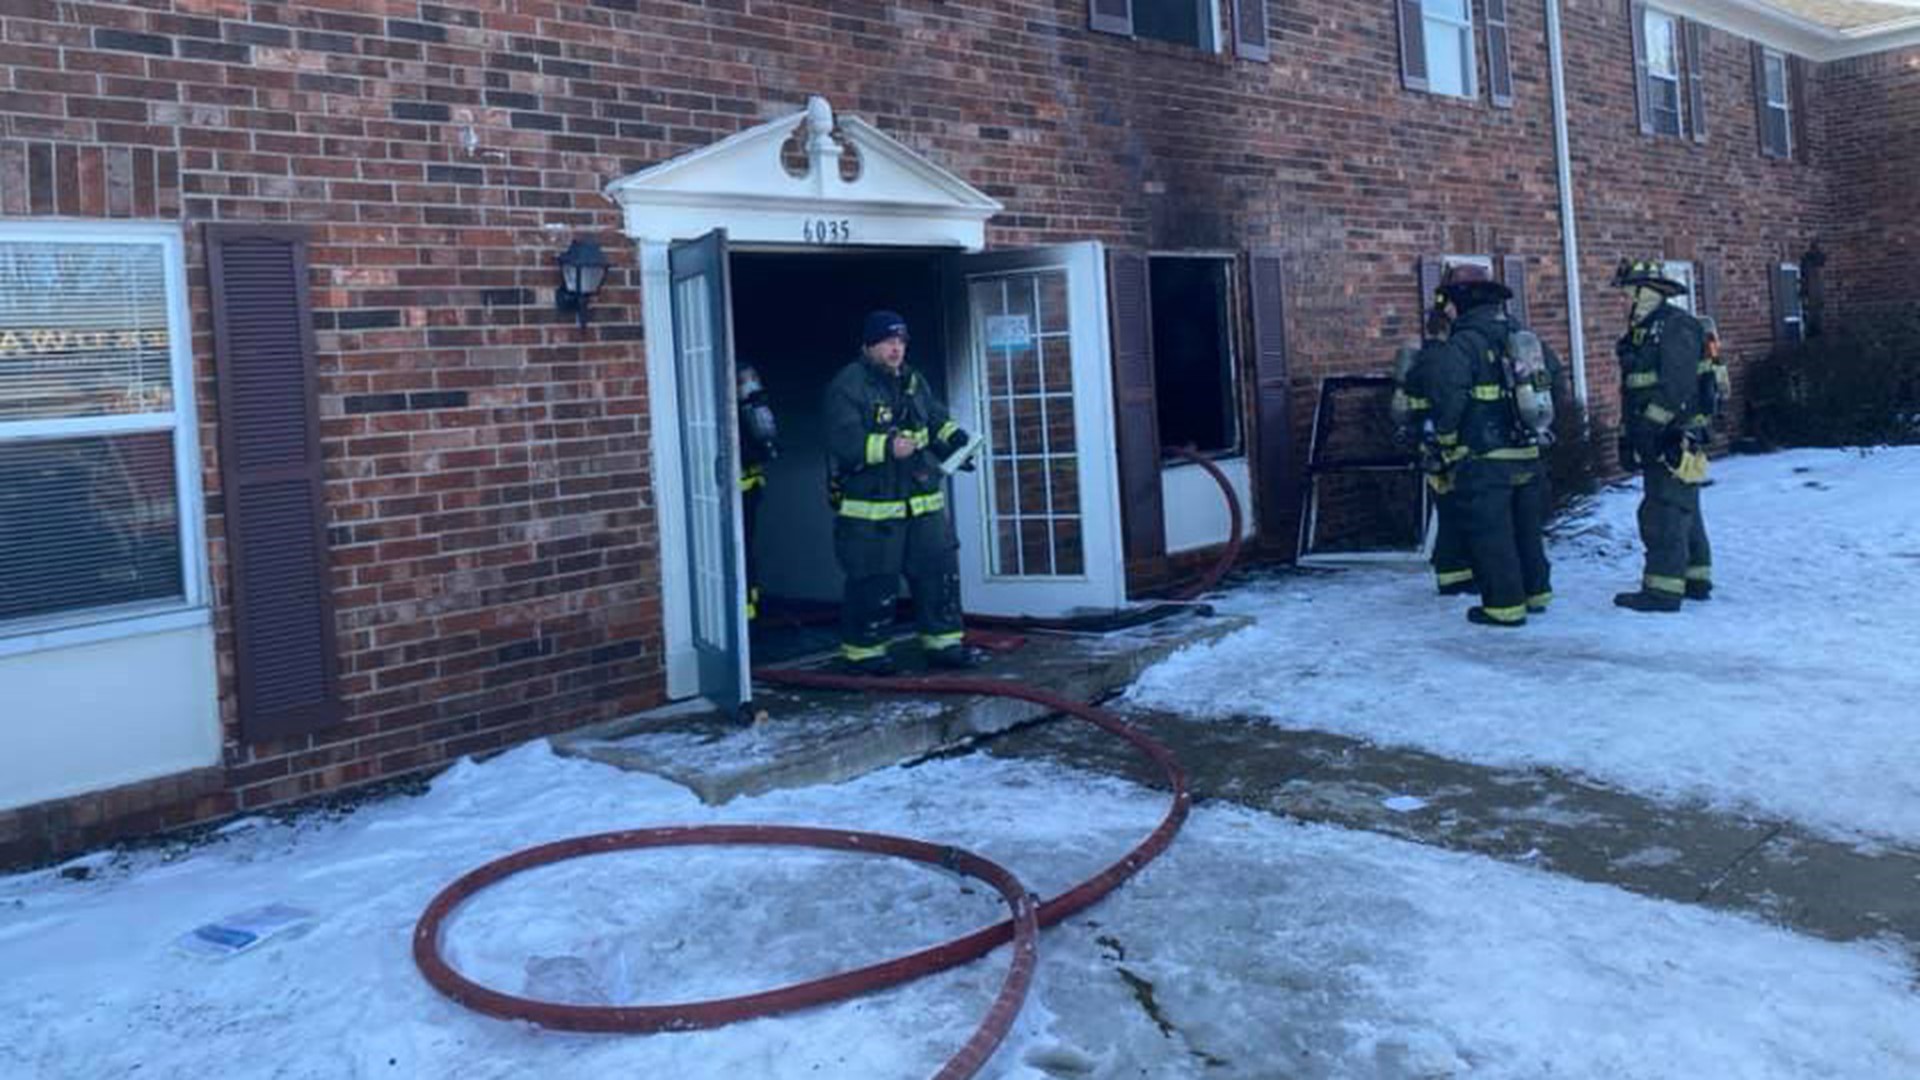 Firefighters with the Wayne Township Fire Department were able to get the victim out as they began the search of the apartment.